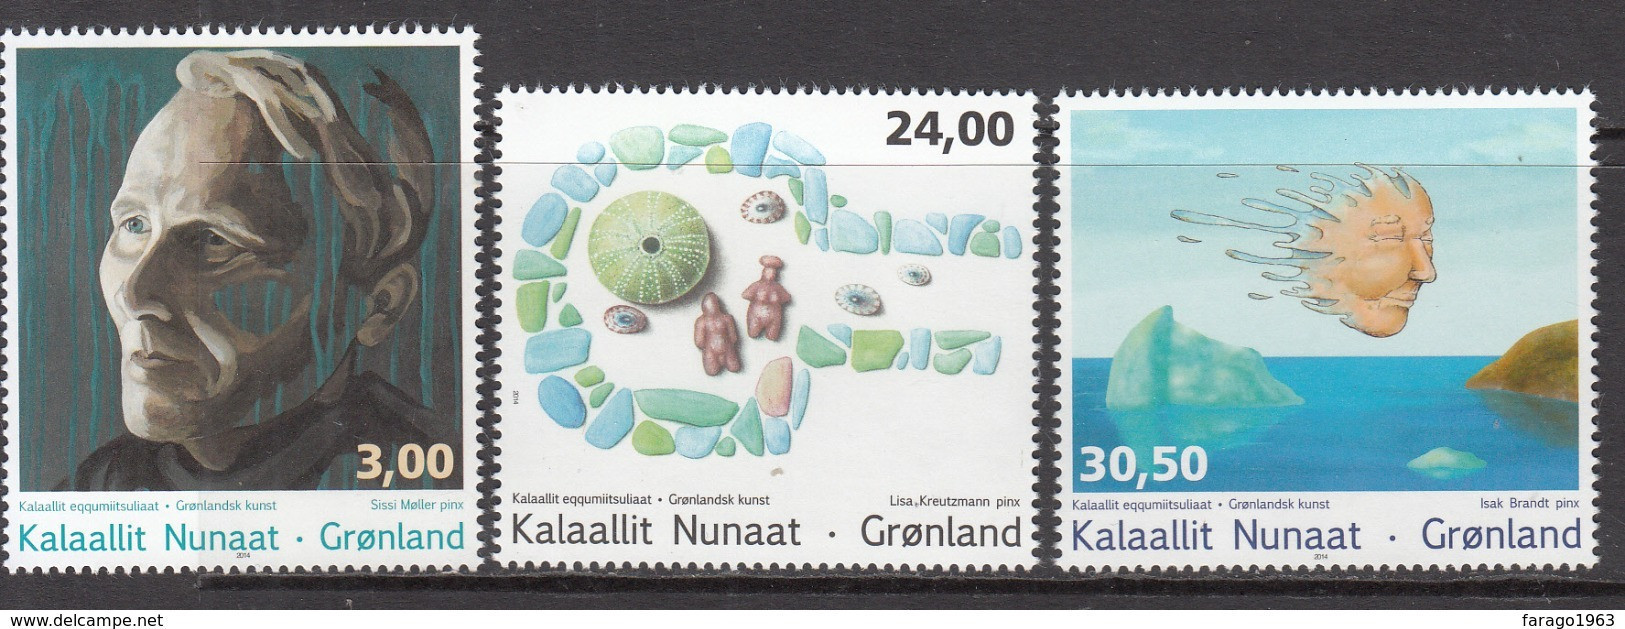 2014 Greenland Contemporary Art Complete Set Of 3 MNH @ BELOW Face Value - Unused Stamps